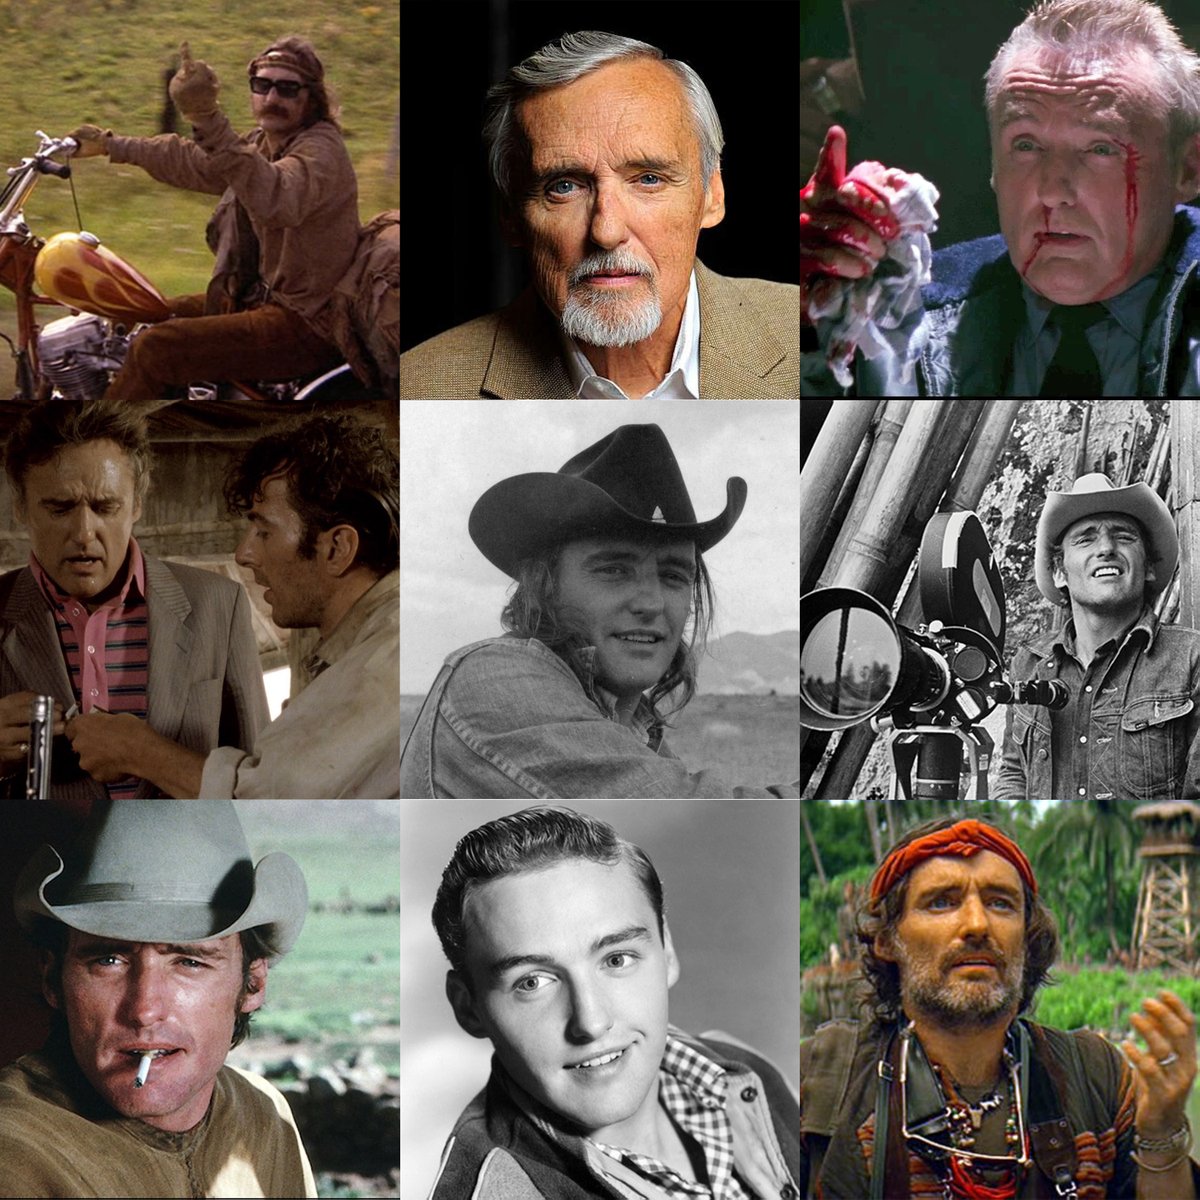 Born on this day 1936, American actor Dennis Hopper. Aside from Easy Rider Hopper was also in Alex Cox' Straight to Hell and Las Flores del Vicio aka The Sky is Falling which was mostly filmed around Mojacar. #botd #birthday #dennishopper #easyrider #straighttohell #actor